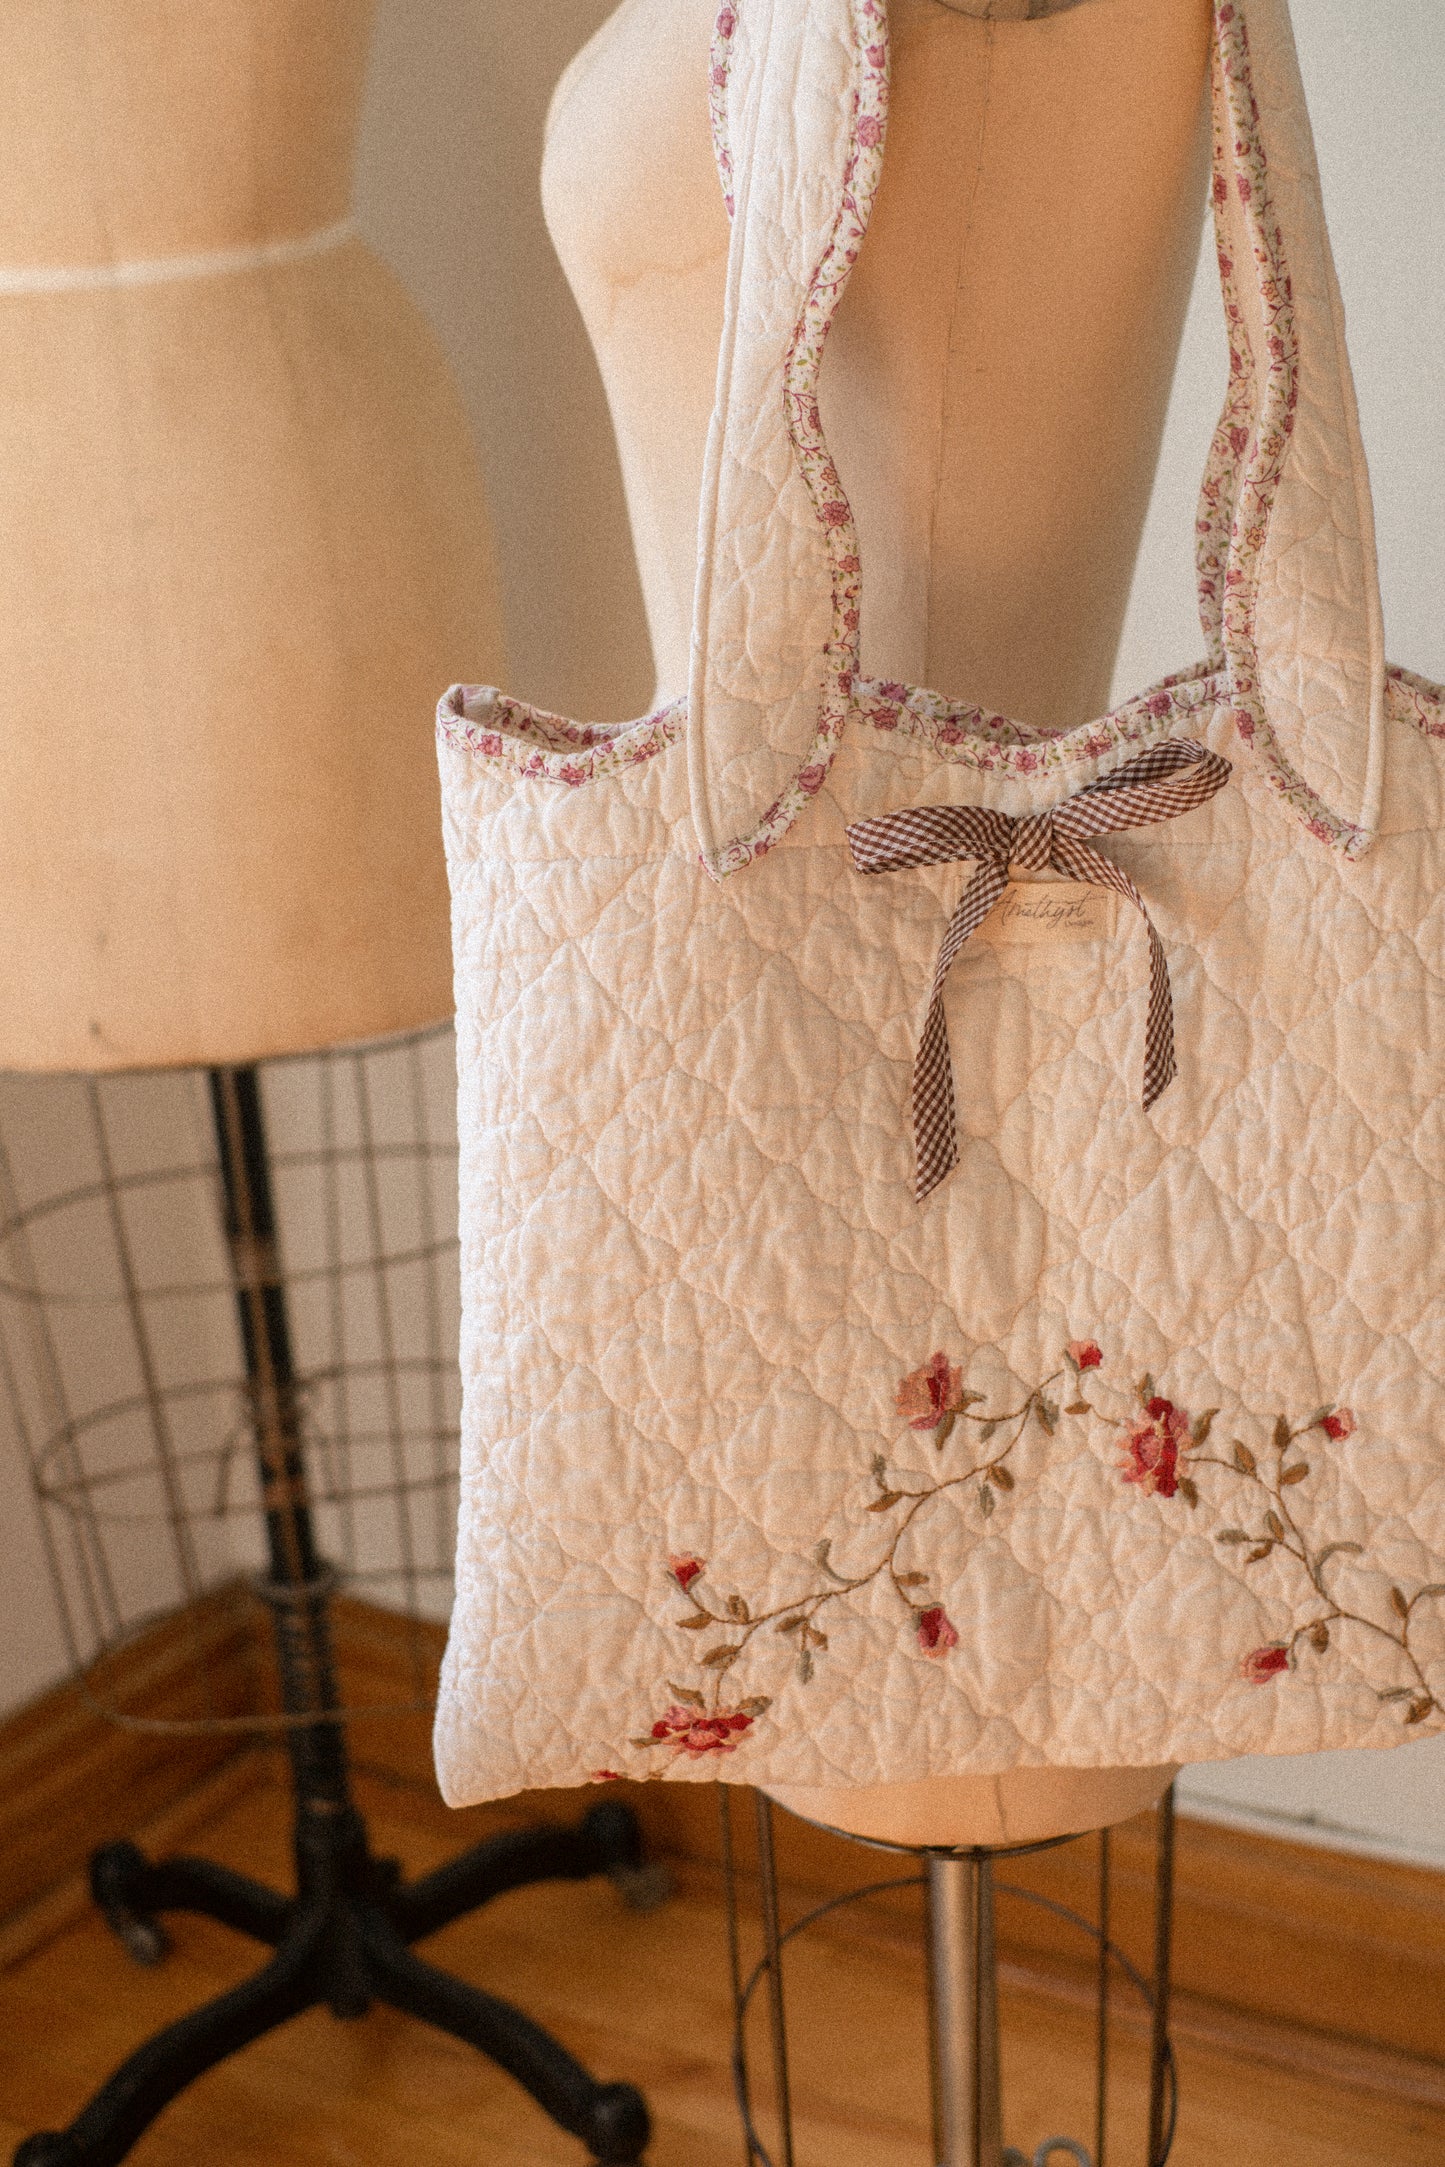 New! Handmade quilted tote bag - Raspberry